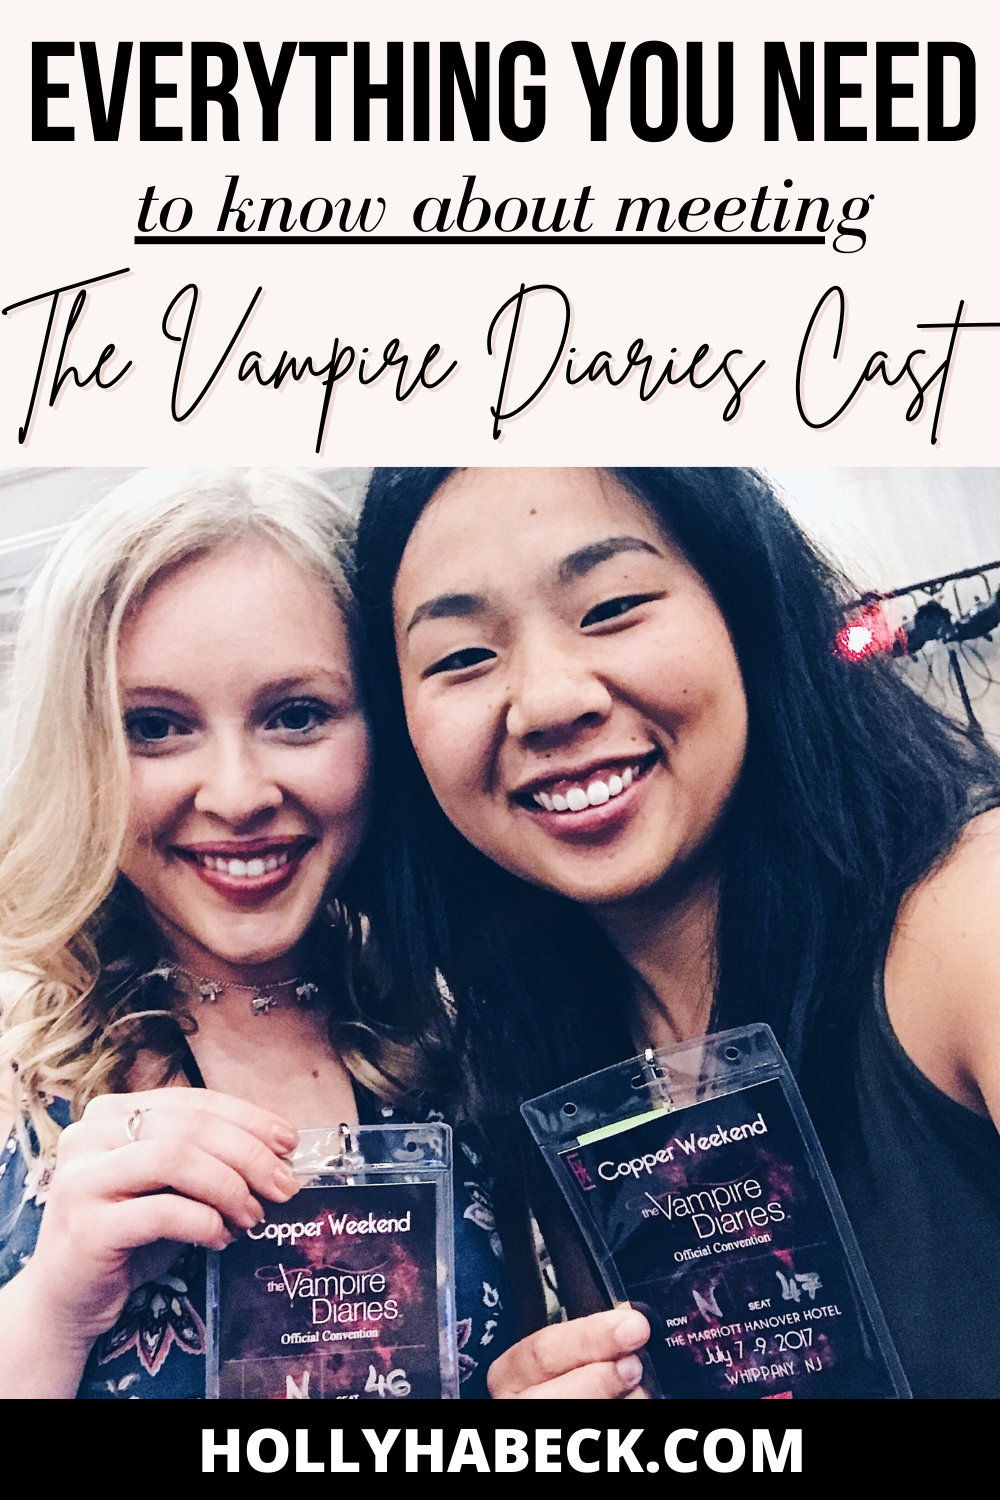 Vampire Diaries Convention Everything You Need to Know (+ How to Meet